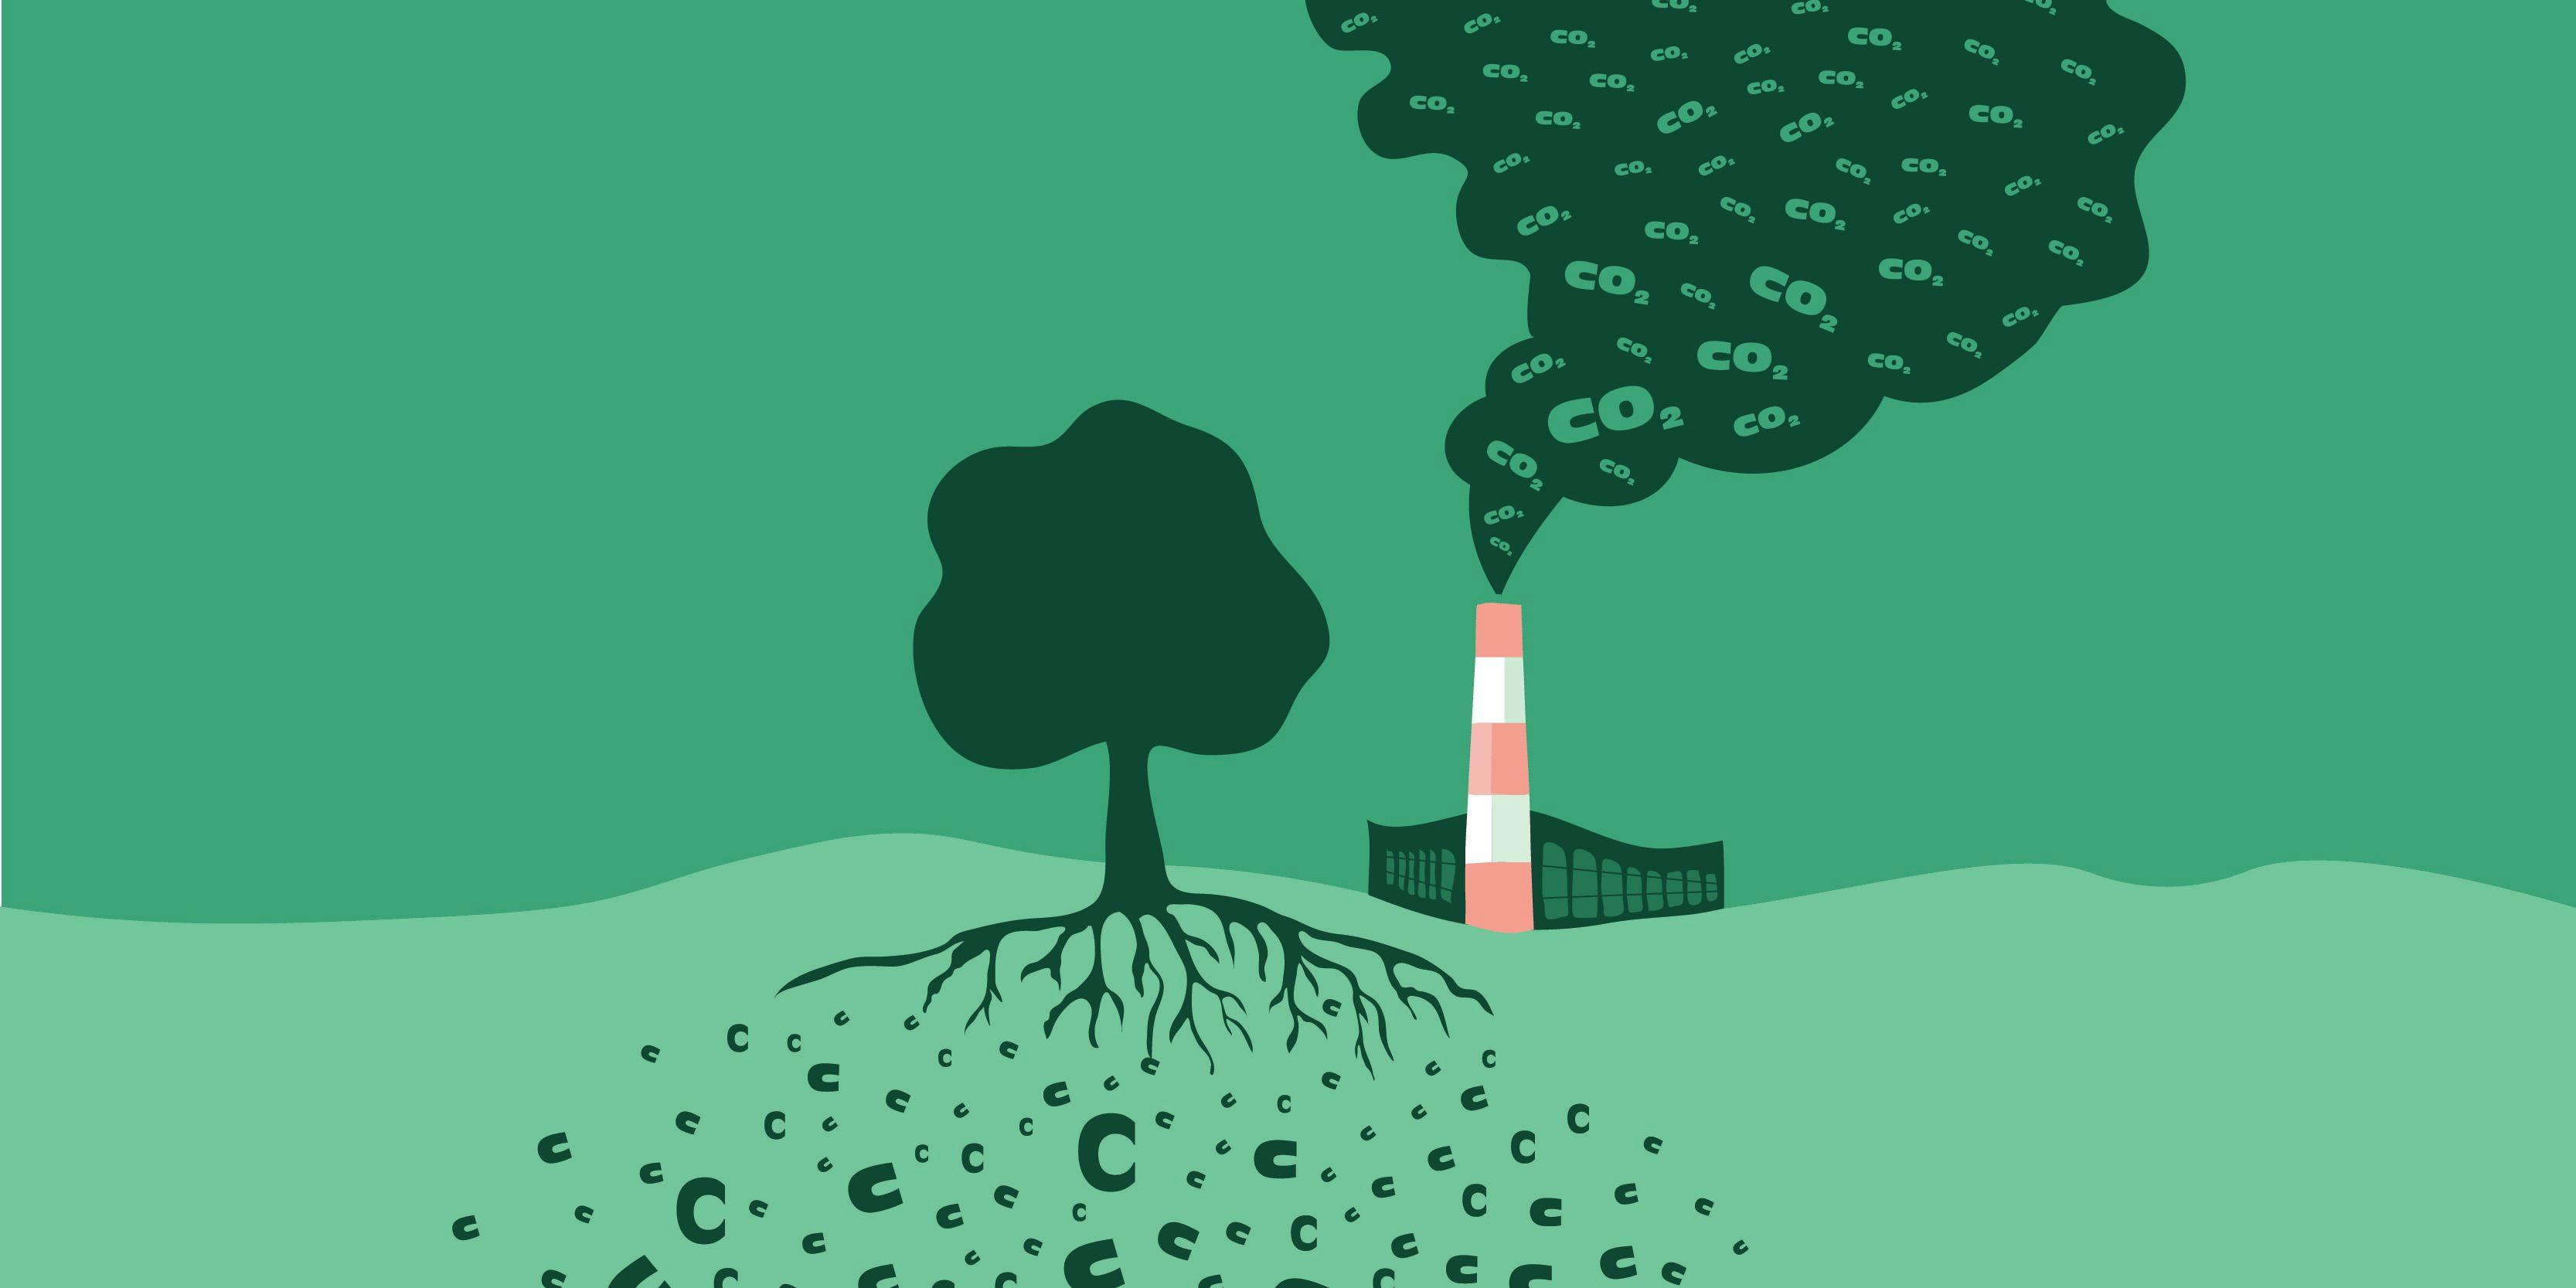 A graphic of a tree and a smokestack.